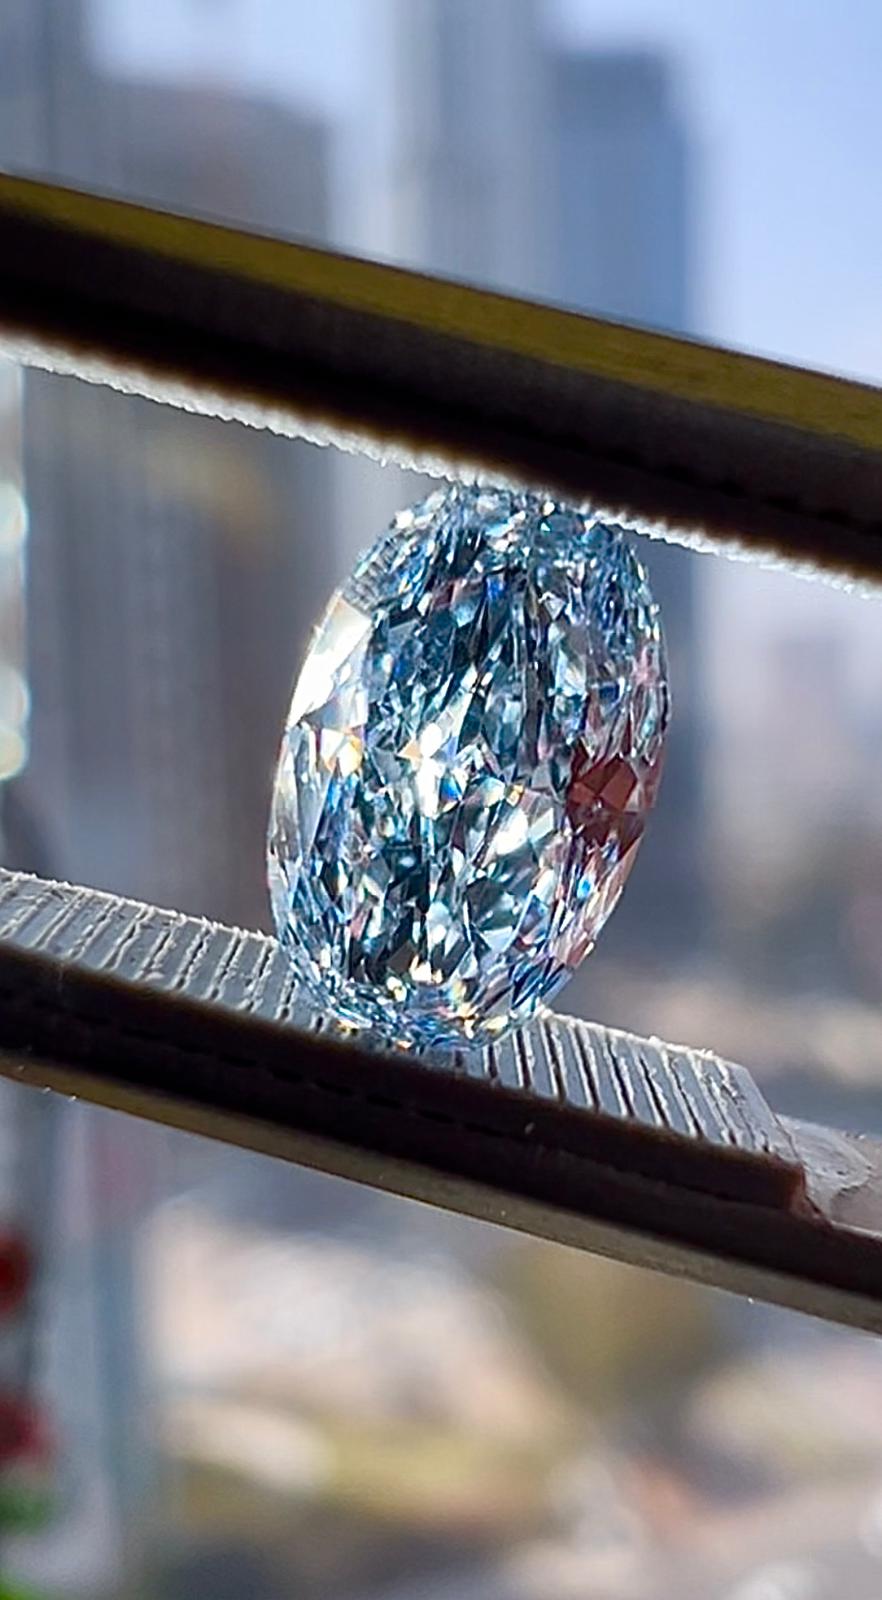 What Color Diamond Is The Most Expensive?